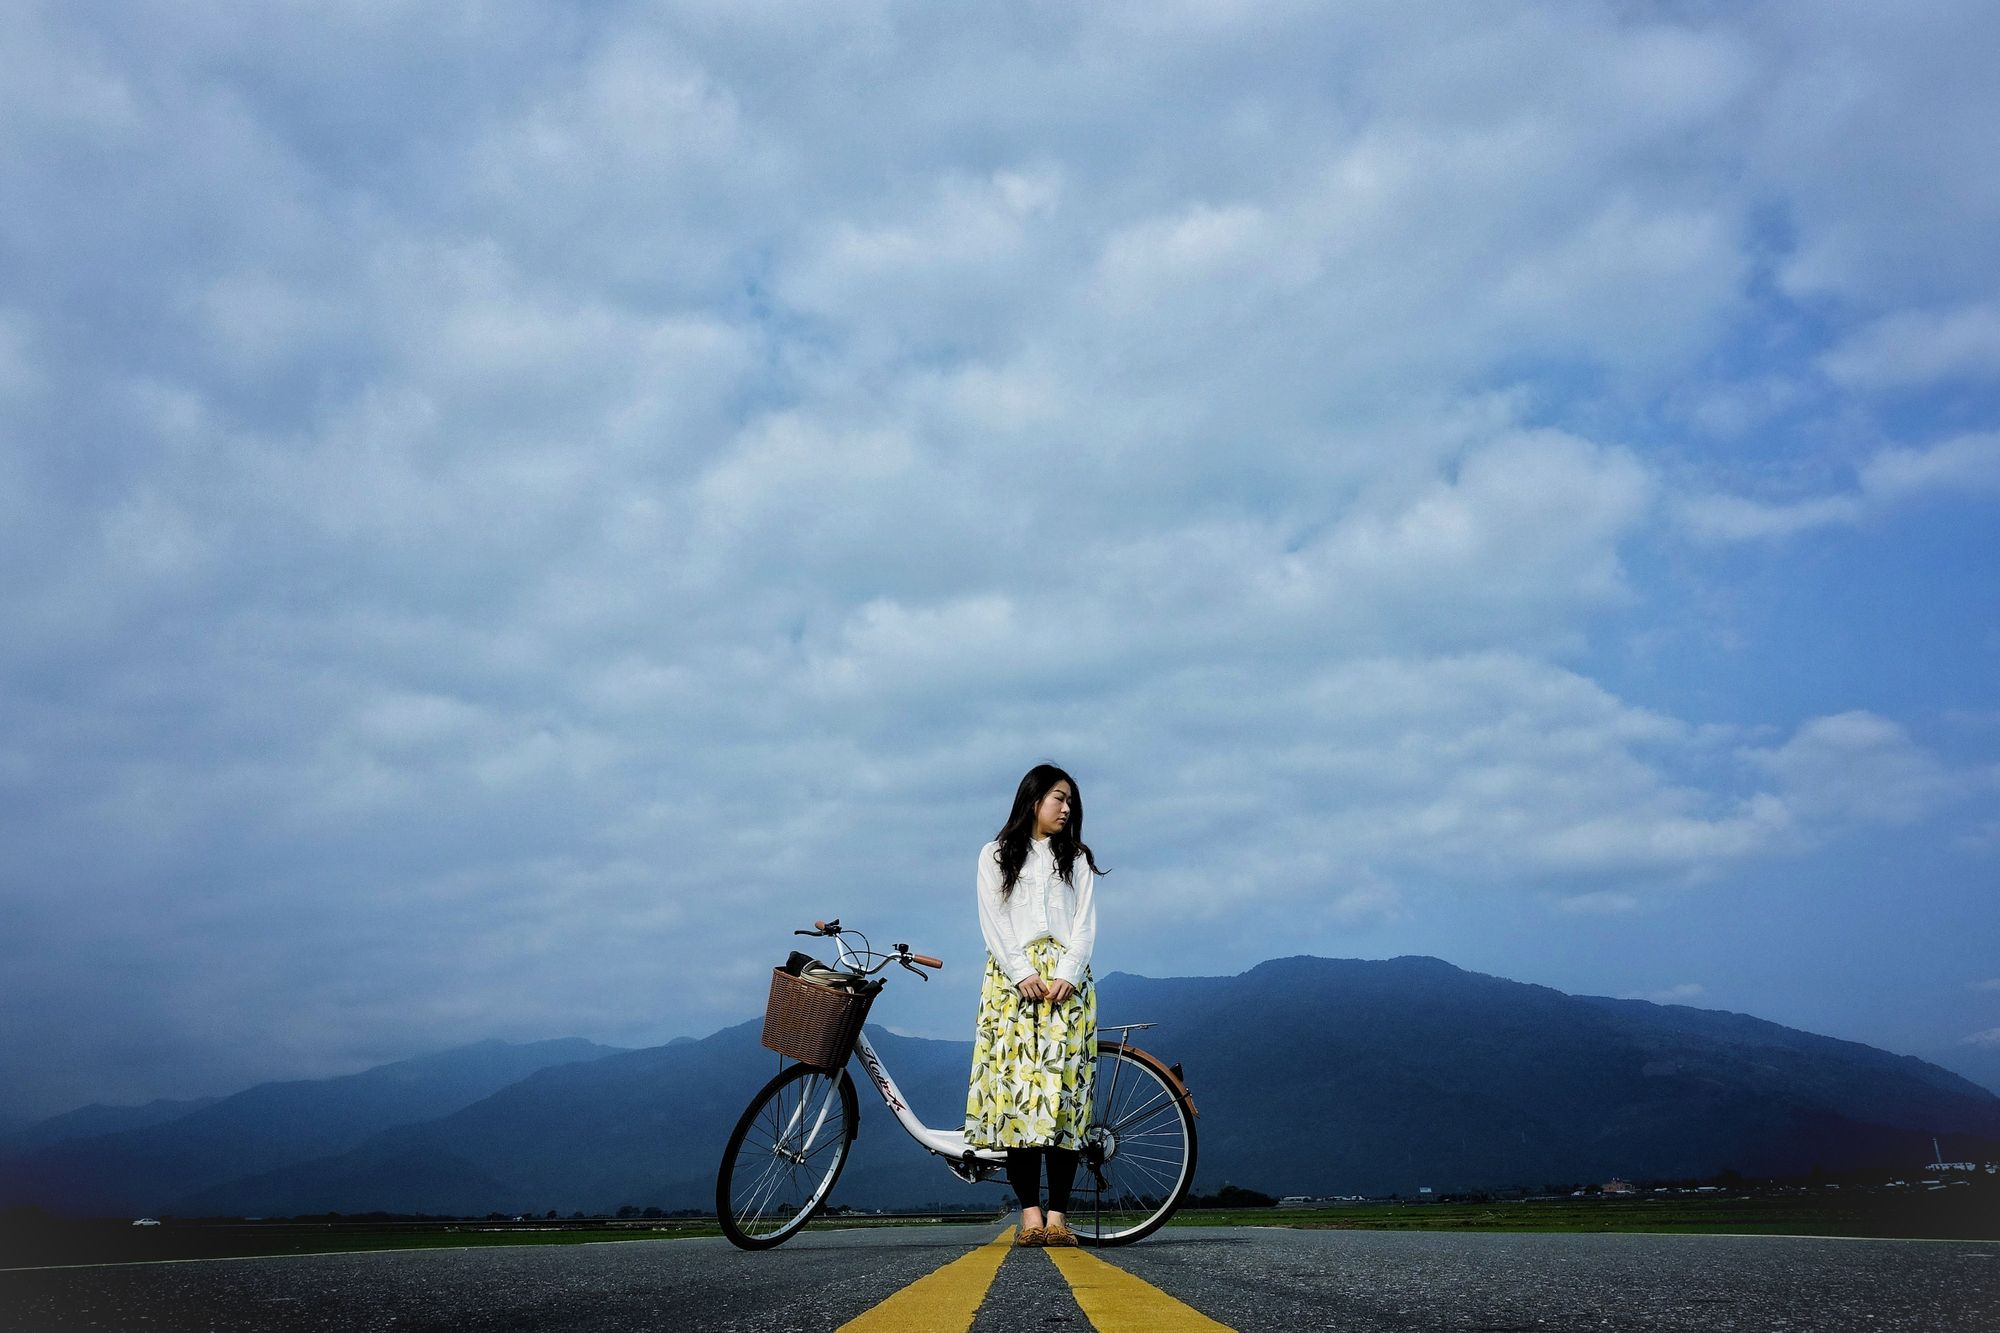 Woman waiting on an empty street with her bicycle, low hills in the background.